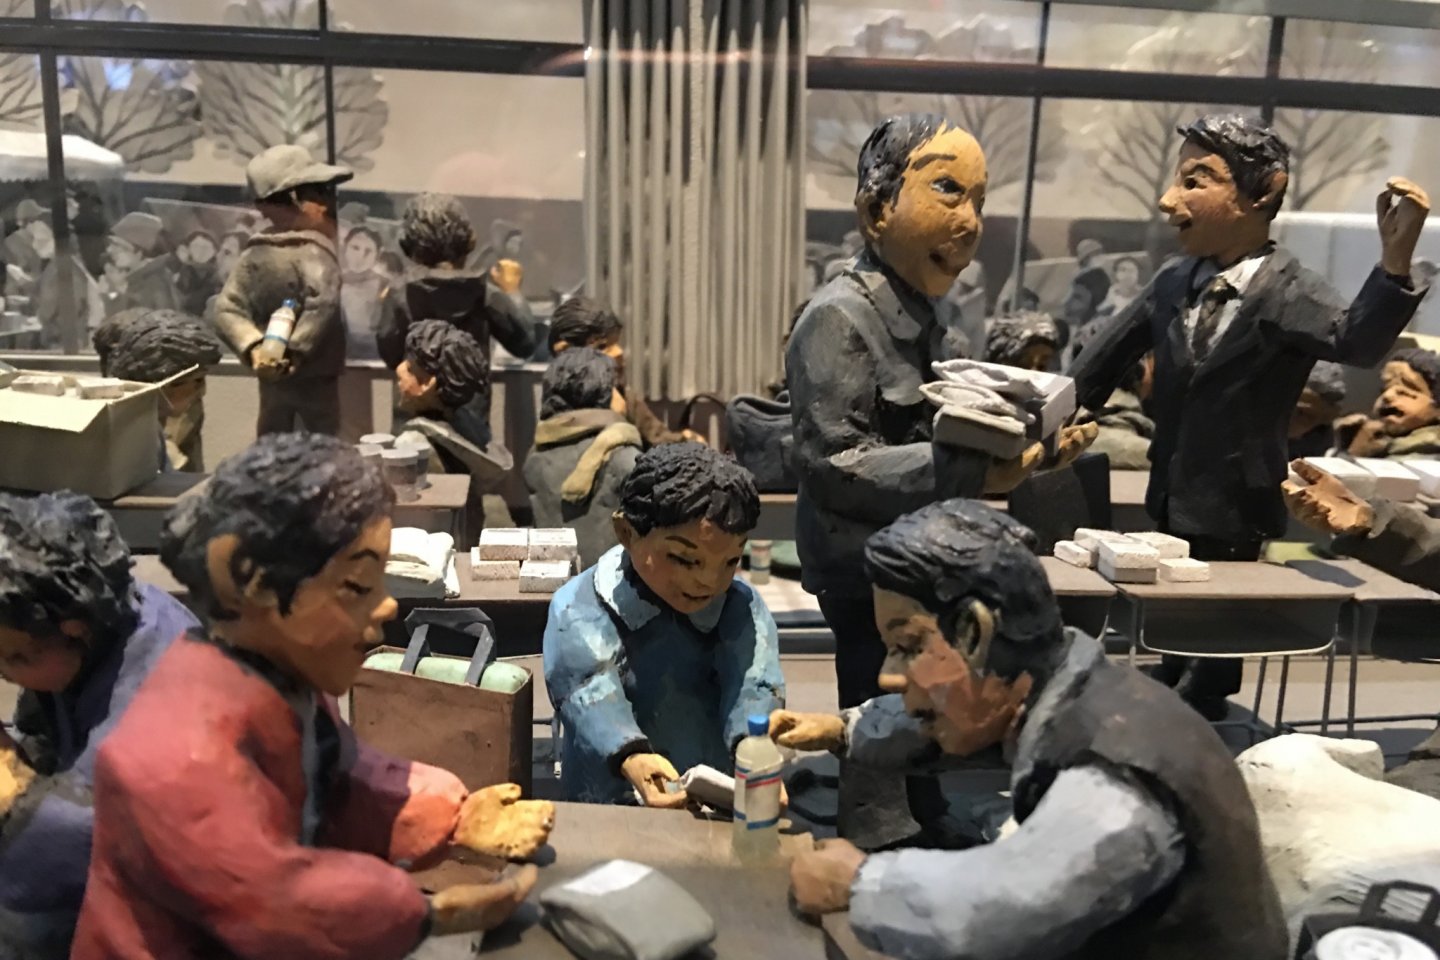 There are many detailed diorama on display.